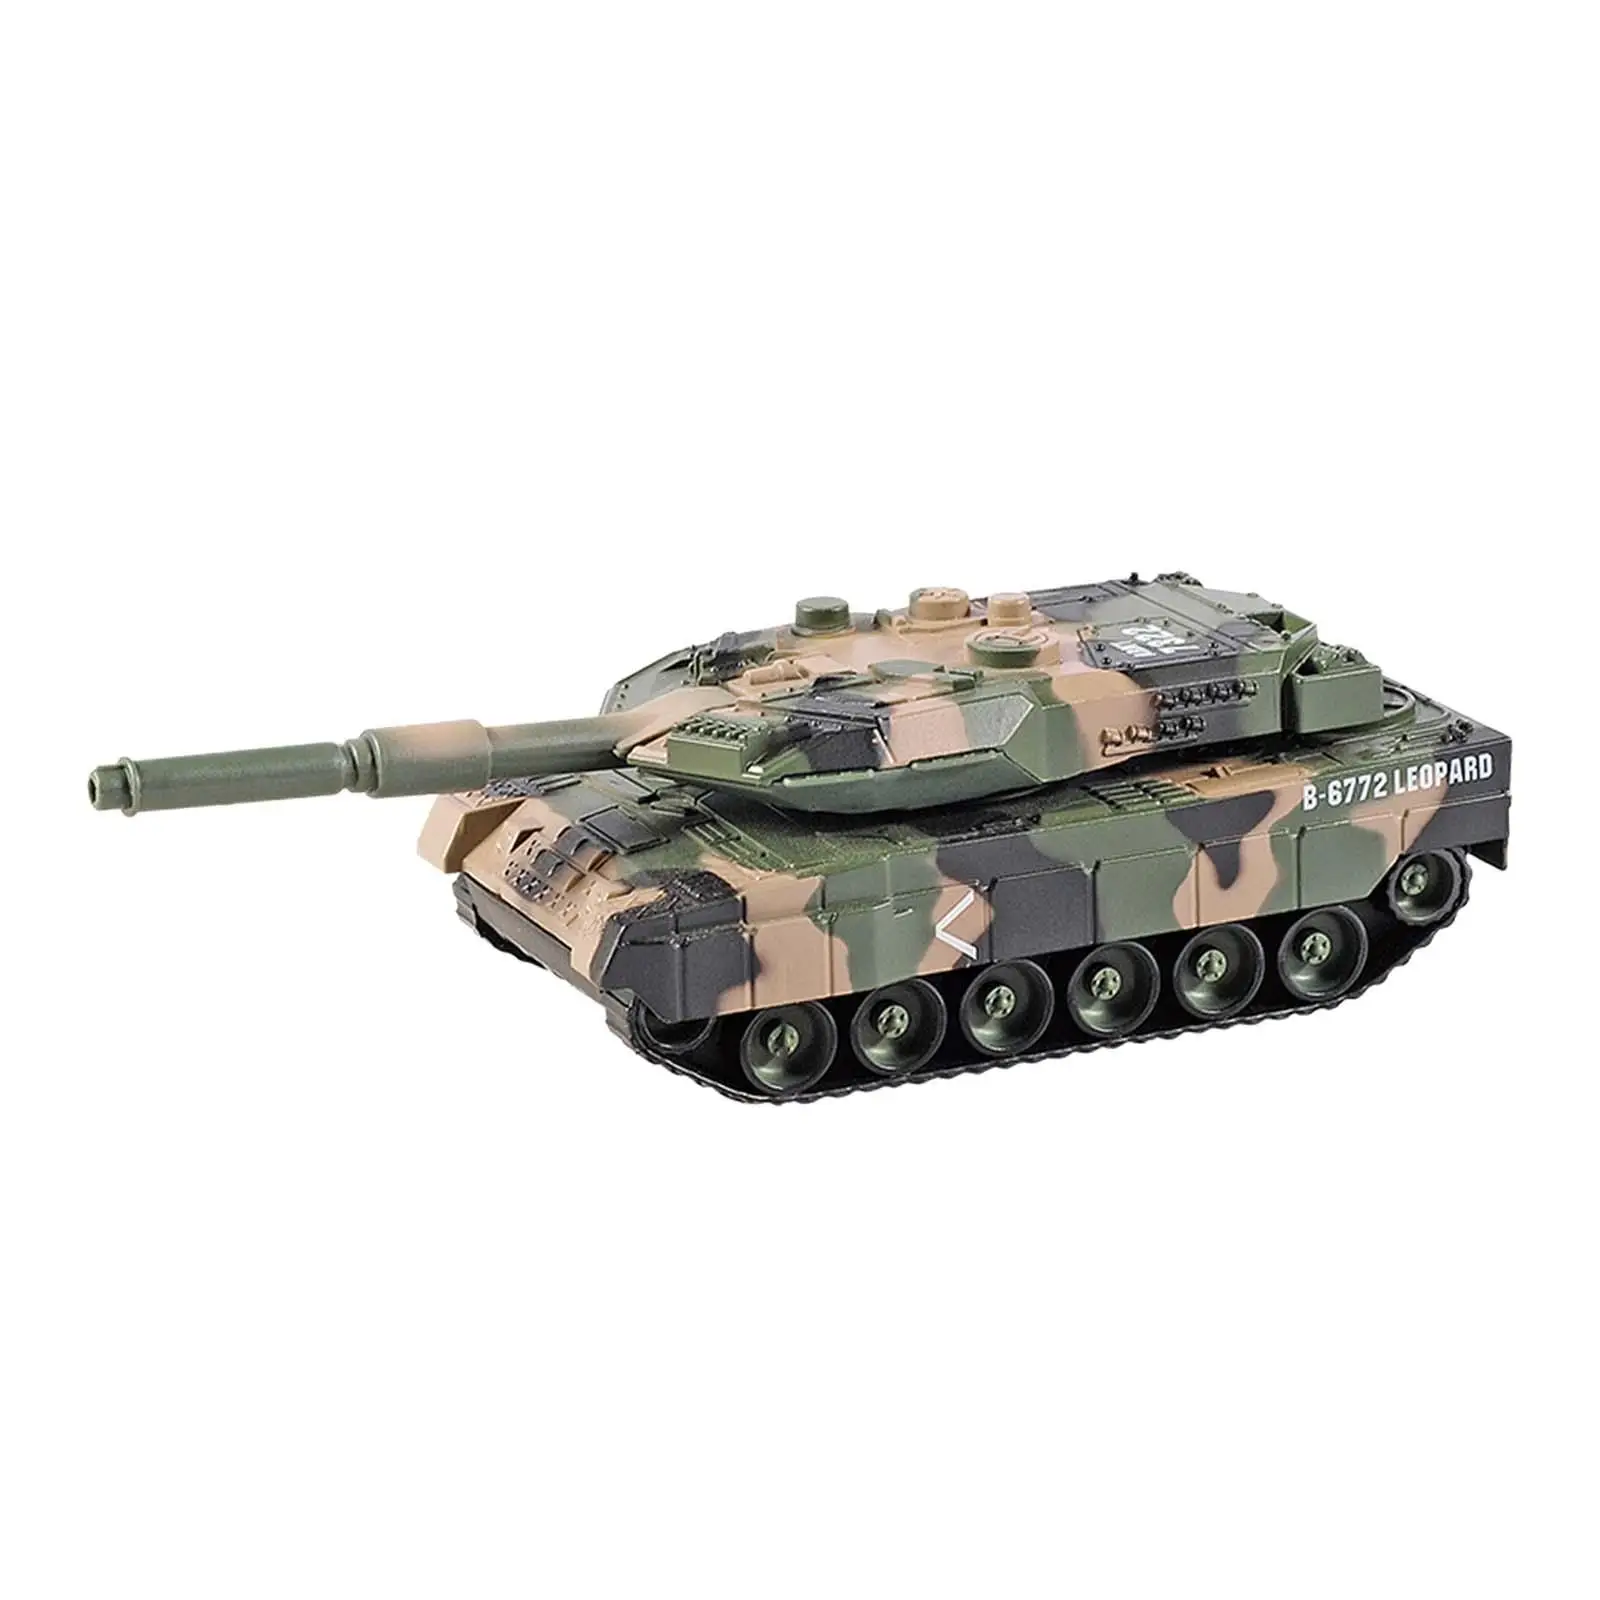 1/24 Tank Toy with Light and Sound Pullback Motion Creative Vehicle Pull Back Tank Toy for Girls Kids 3-7 Years Old Boy Gift